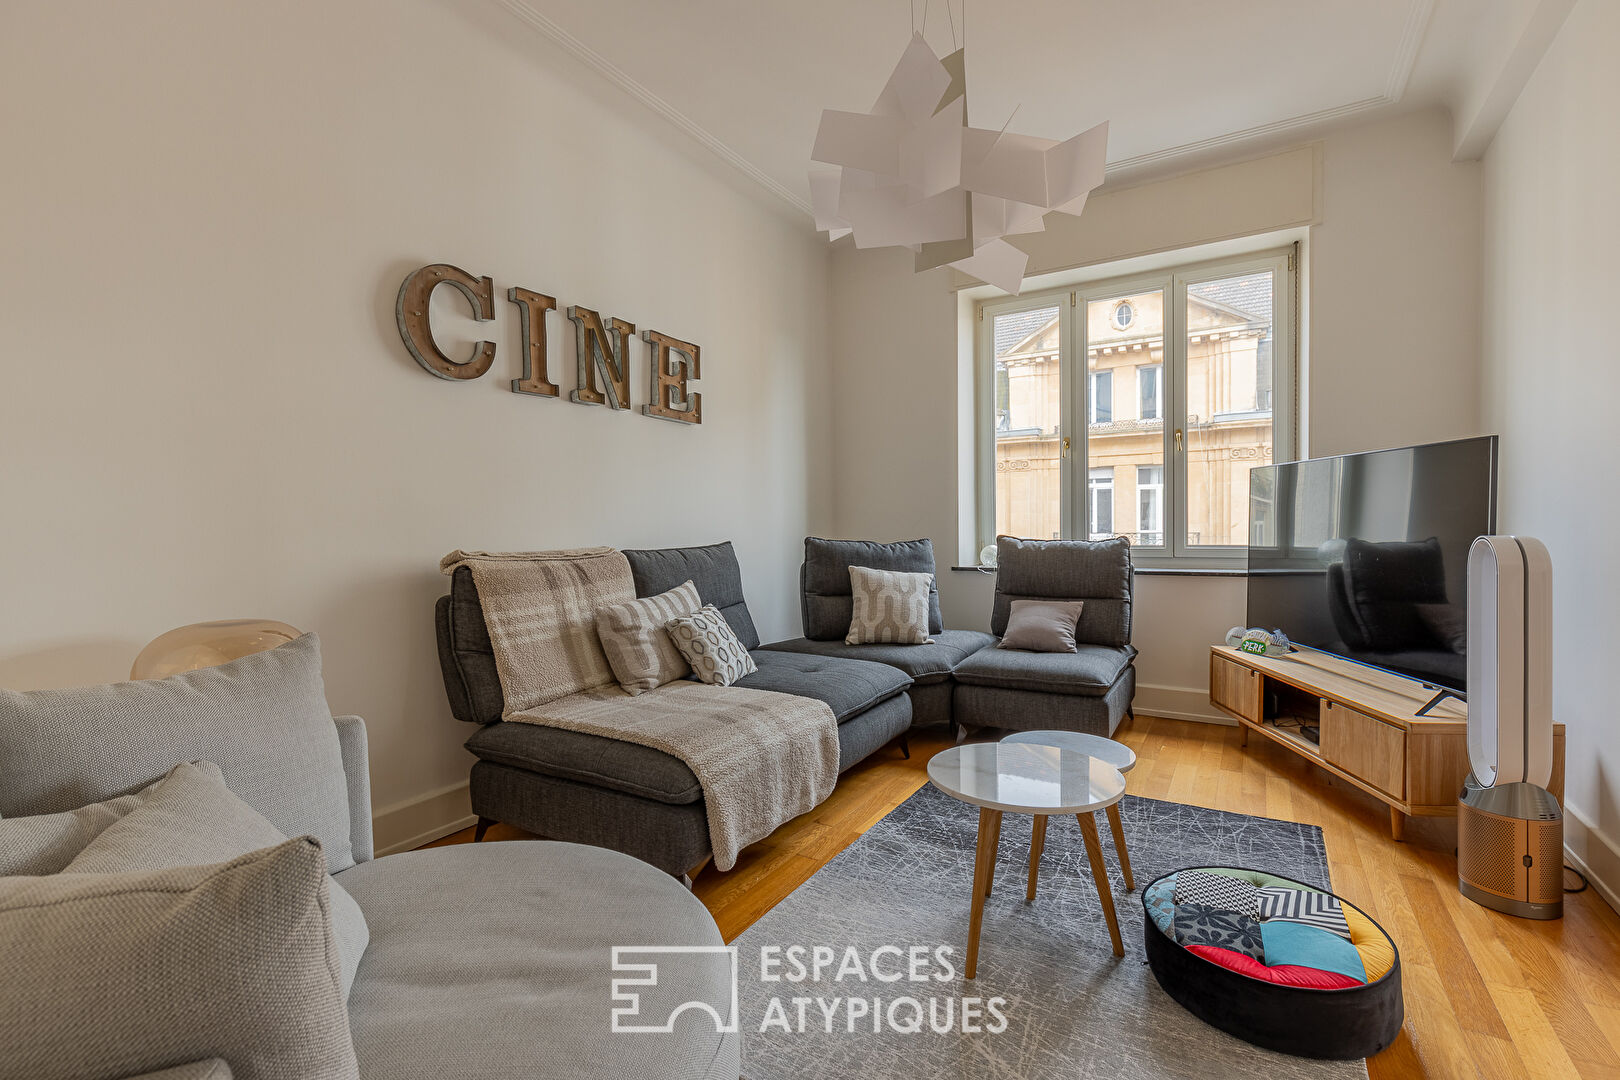 Charming flat in the heart of the Imperial Quarter